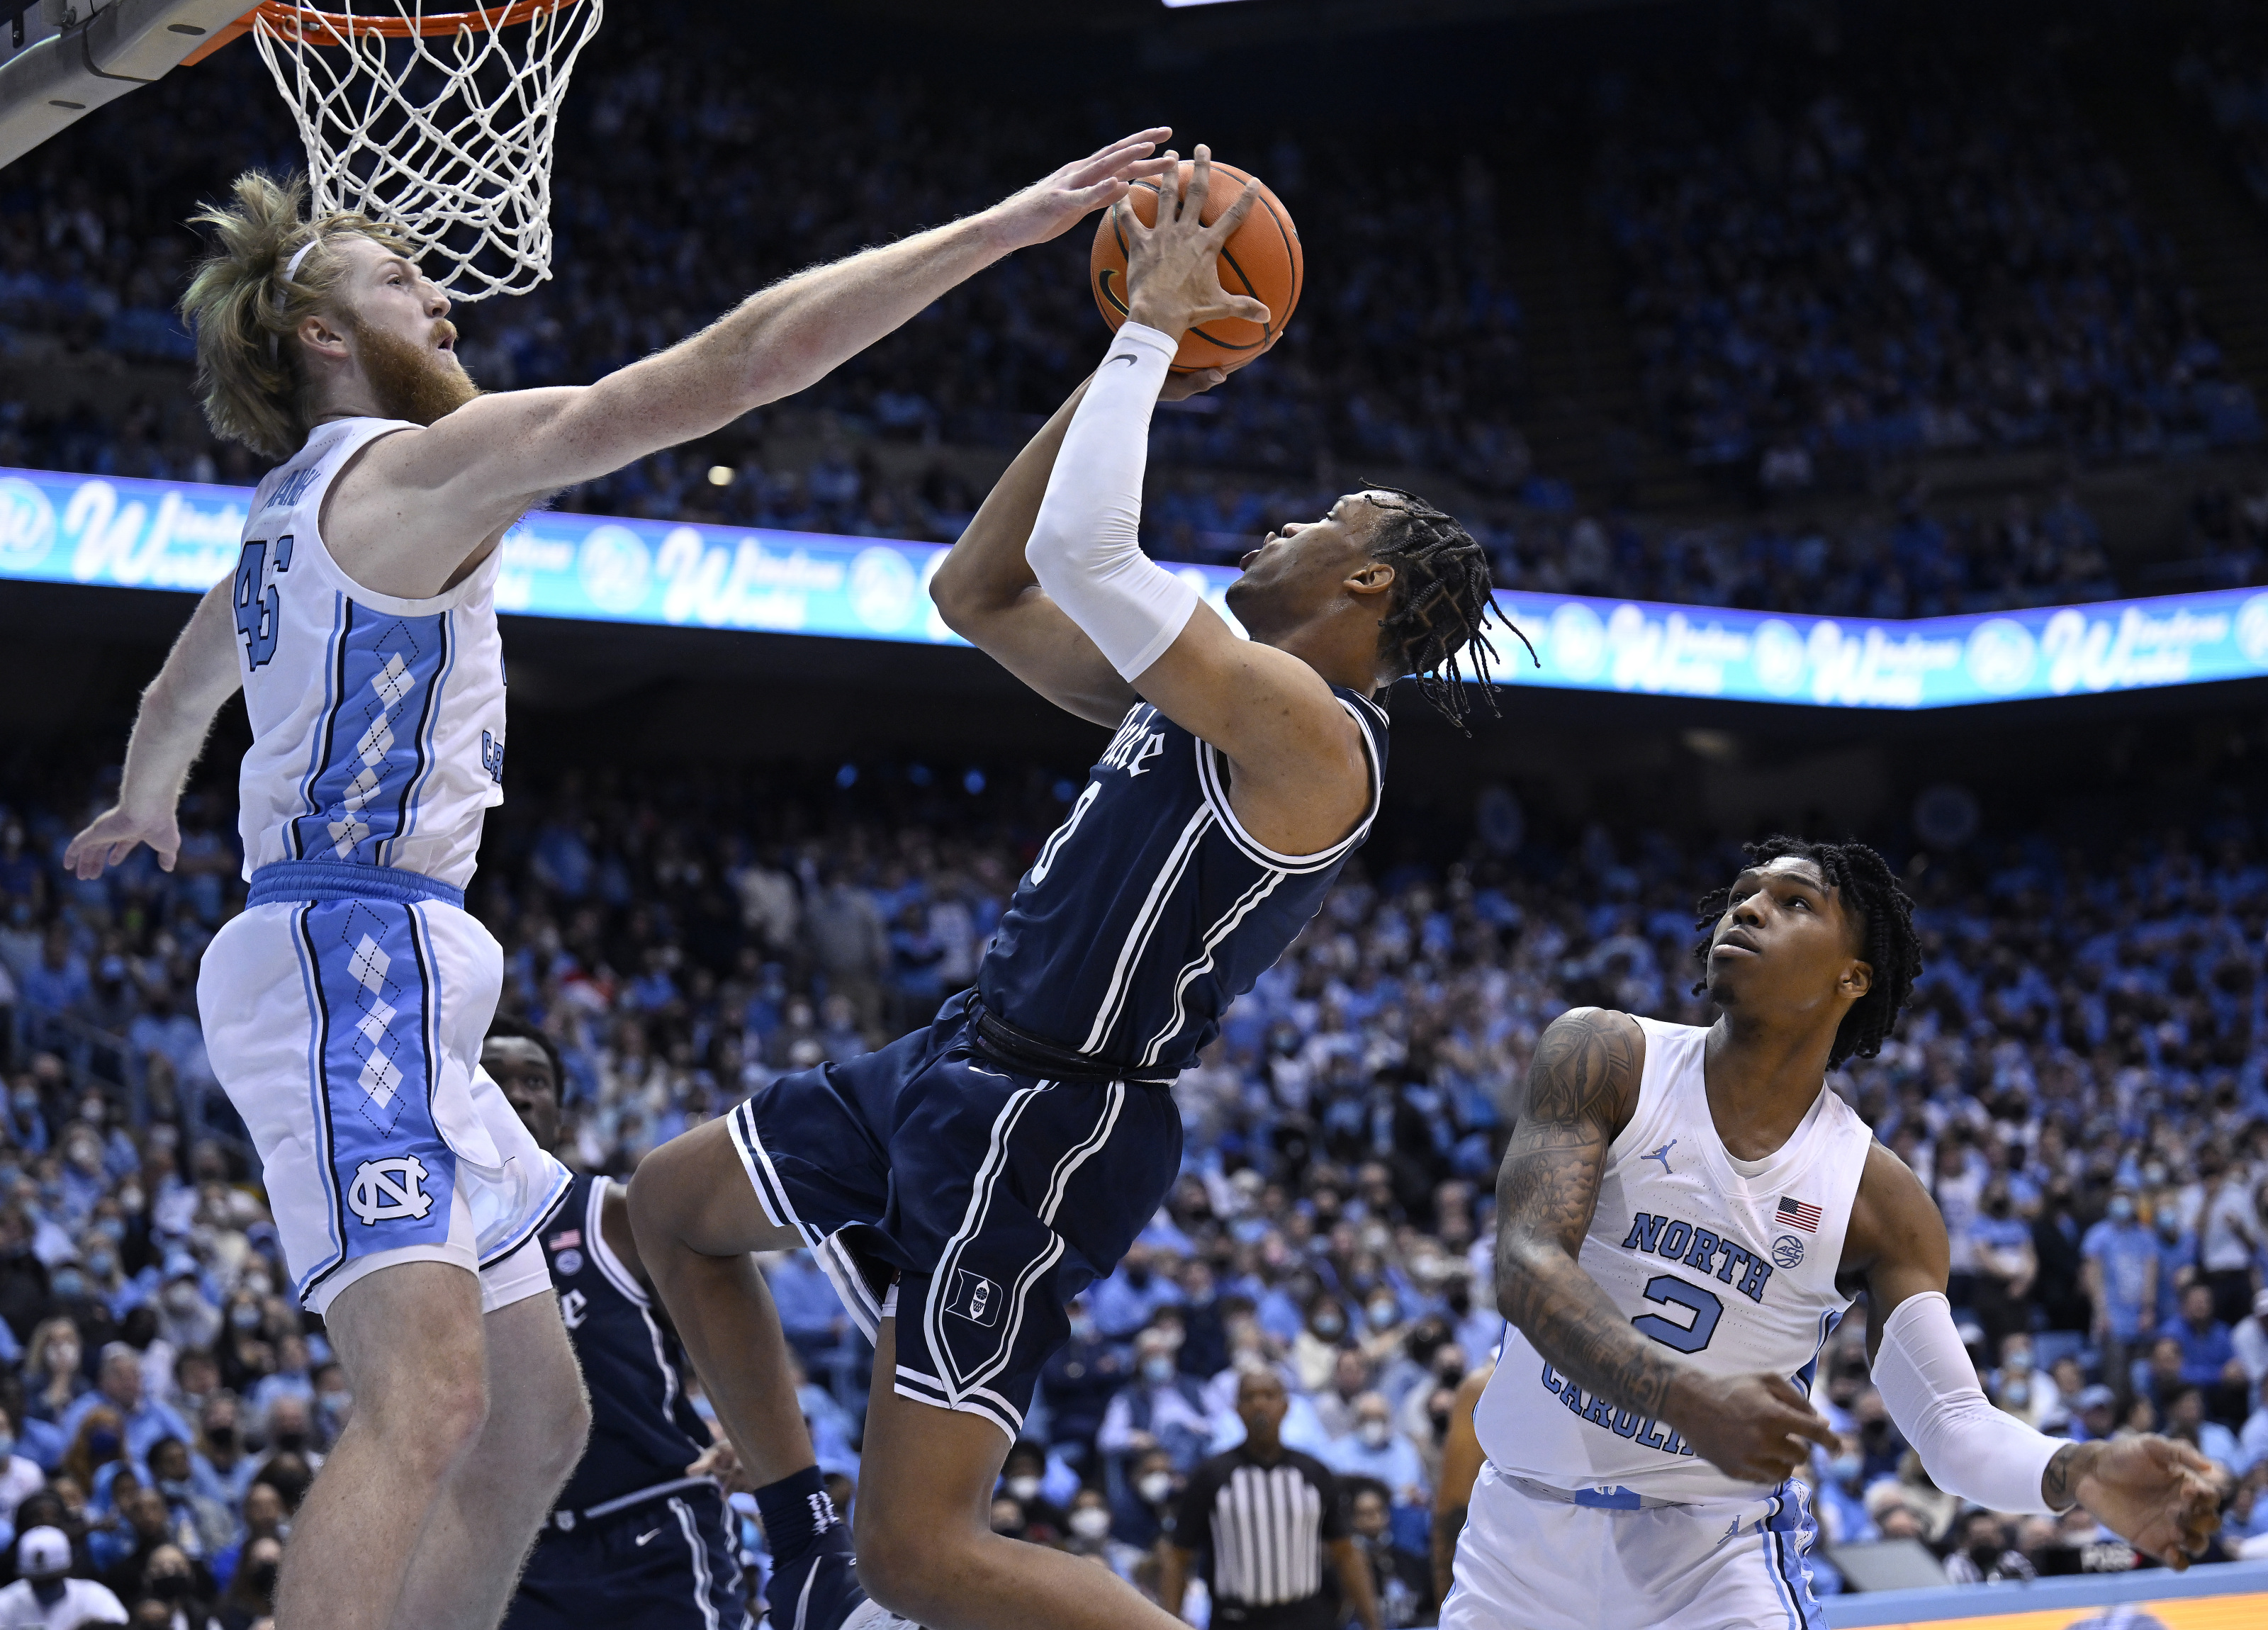 UNC Basketball embarrassed by Duke on home floor